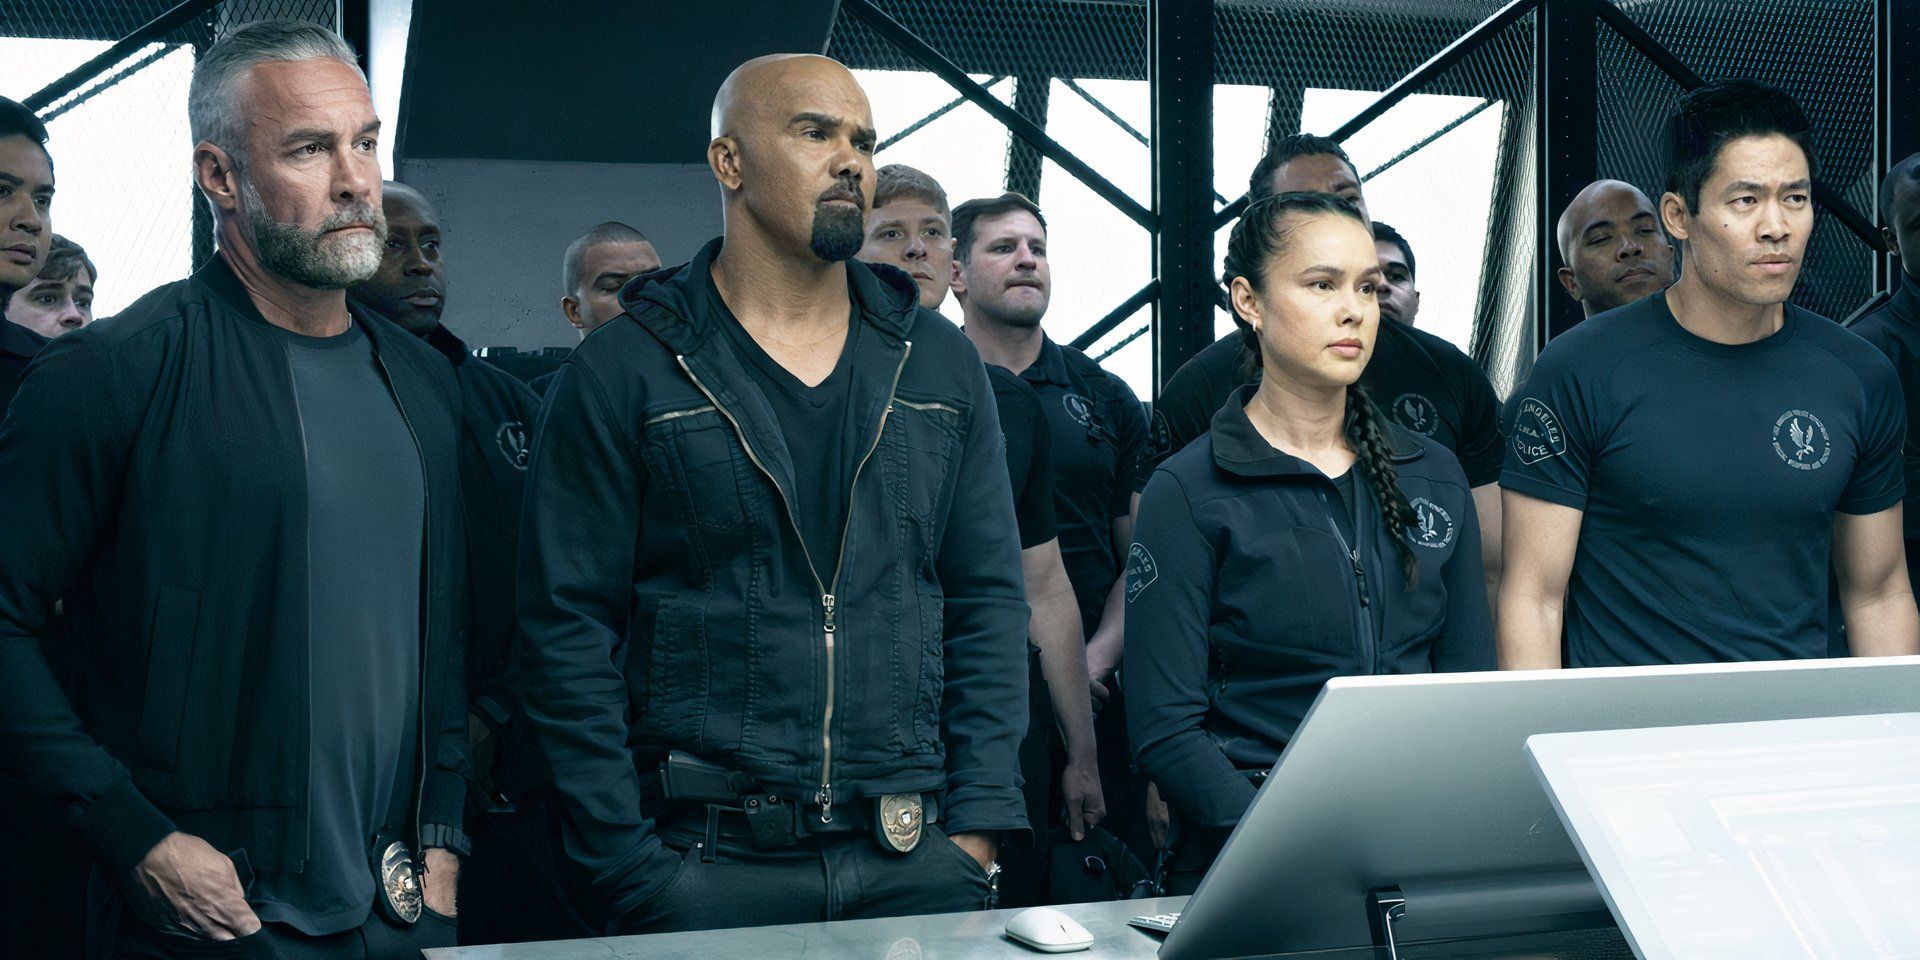 The cast of SWAT season 6 standing together in a photo for the finale